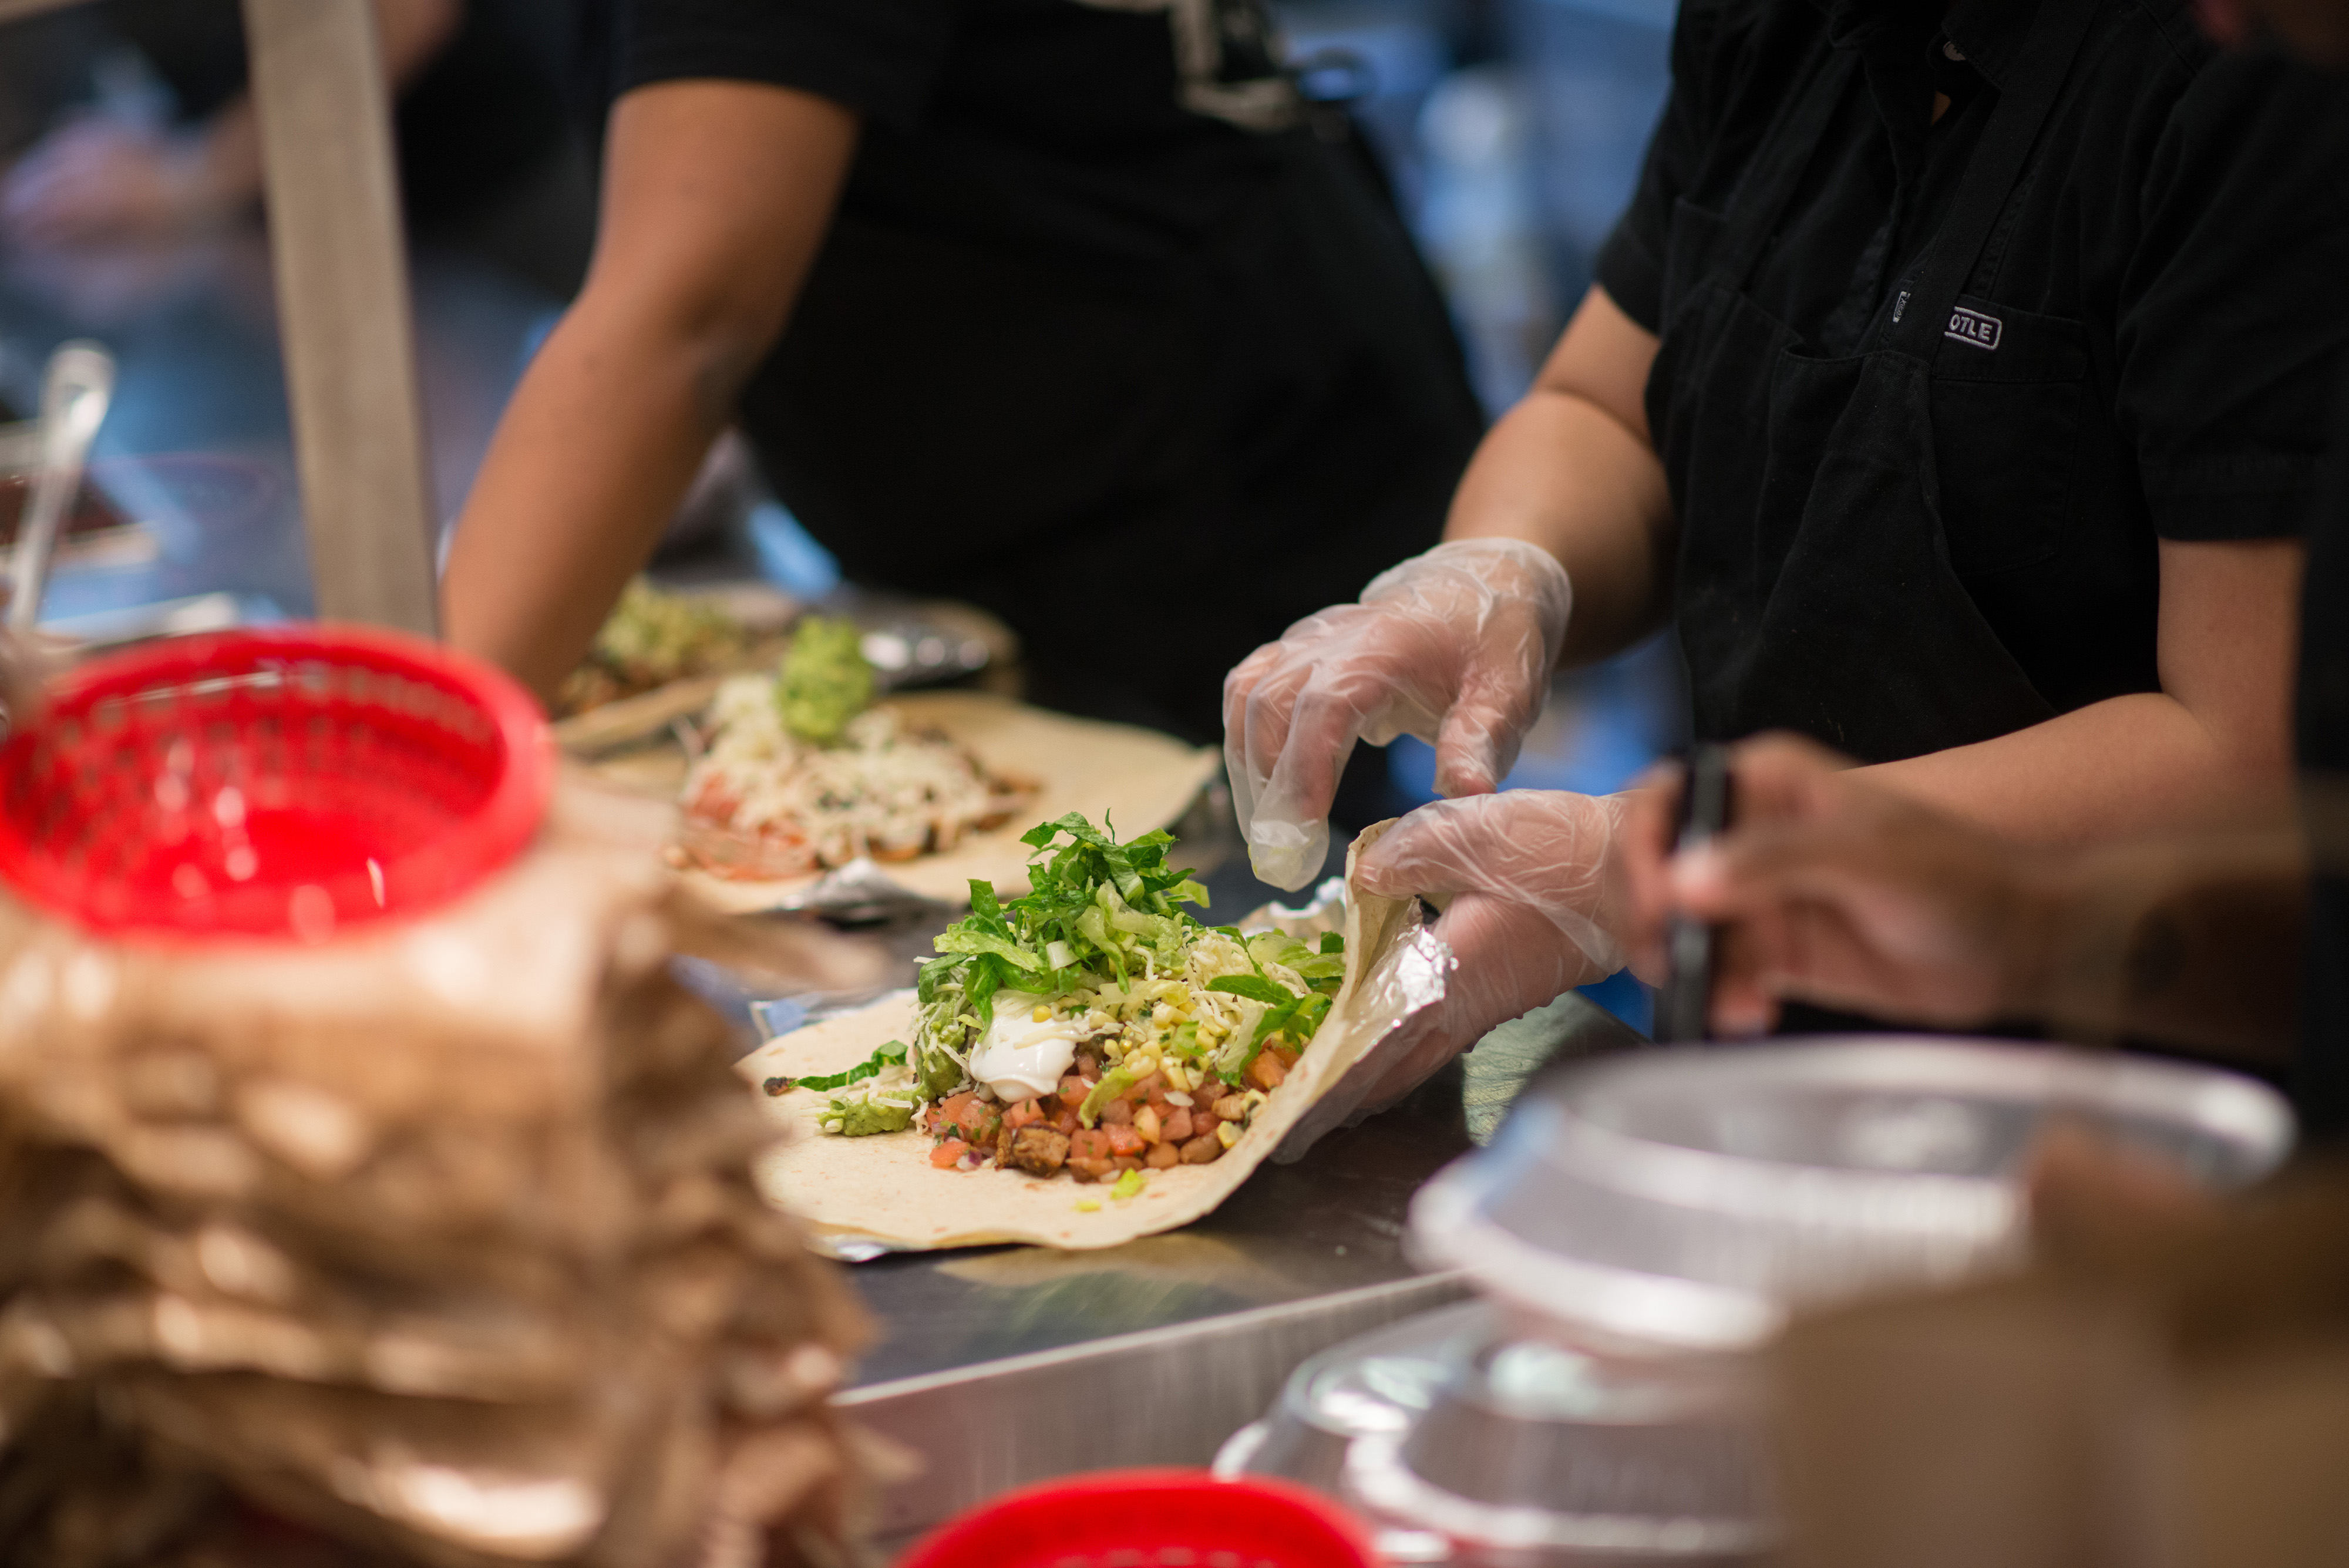 Employees prepare lunch orders at a Chipotle Mexican Grill restaurant at Madison Square Park in New York, U.S., on Wednesday, Jan. 29, 2014. (Bloomberg&mdash;Bloomberg via Getty Images)